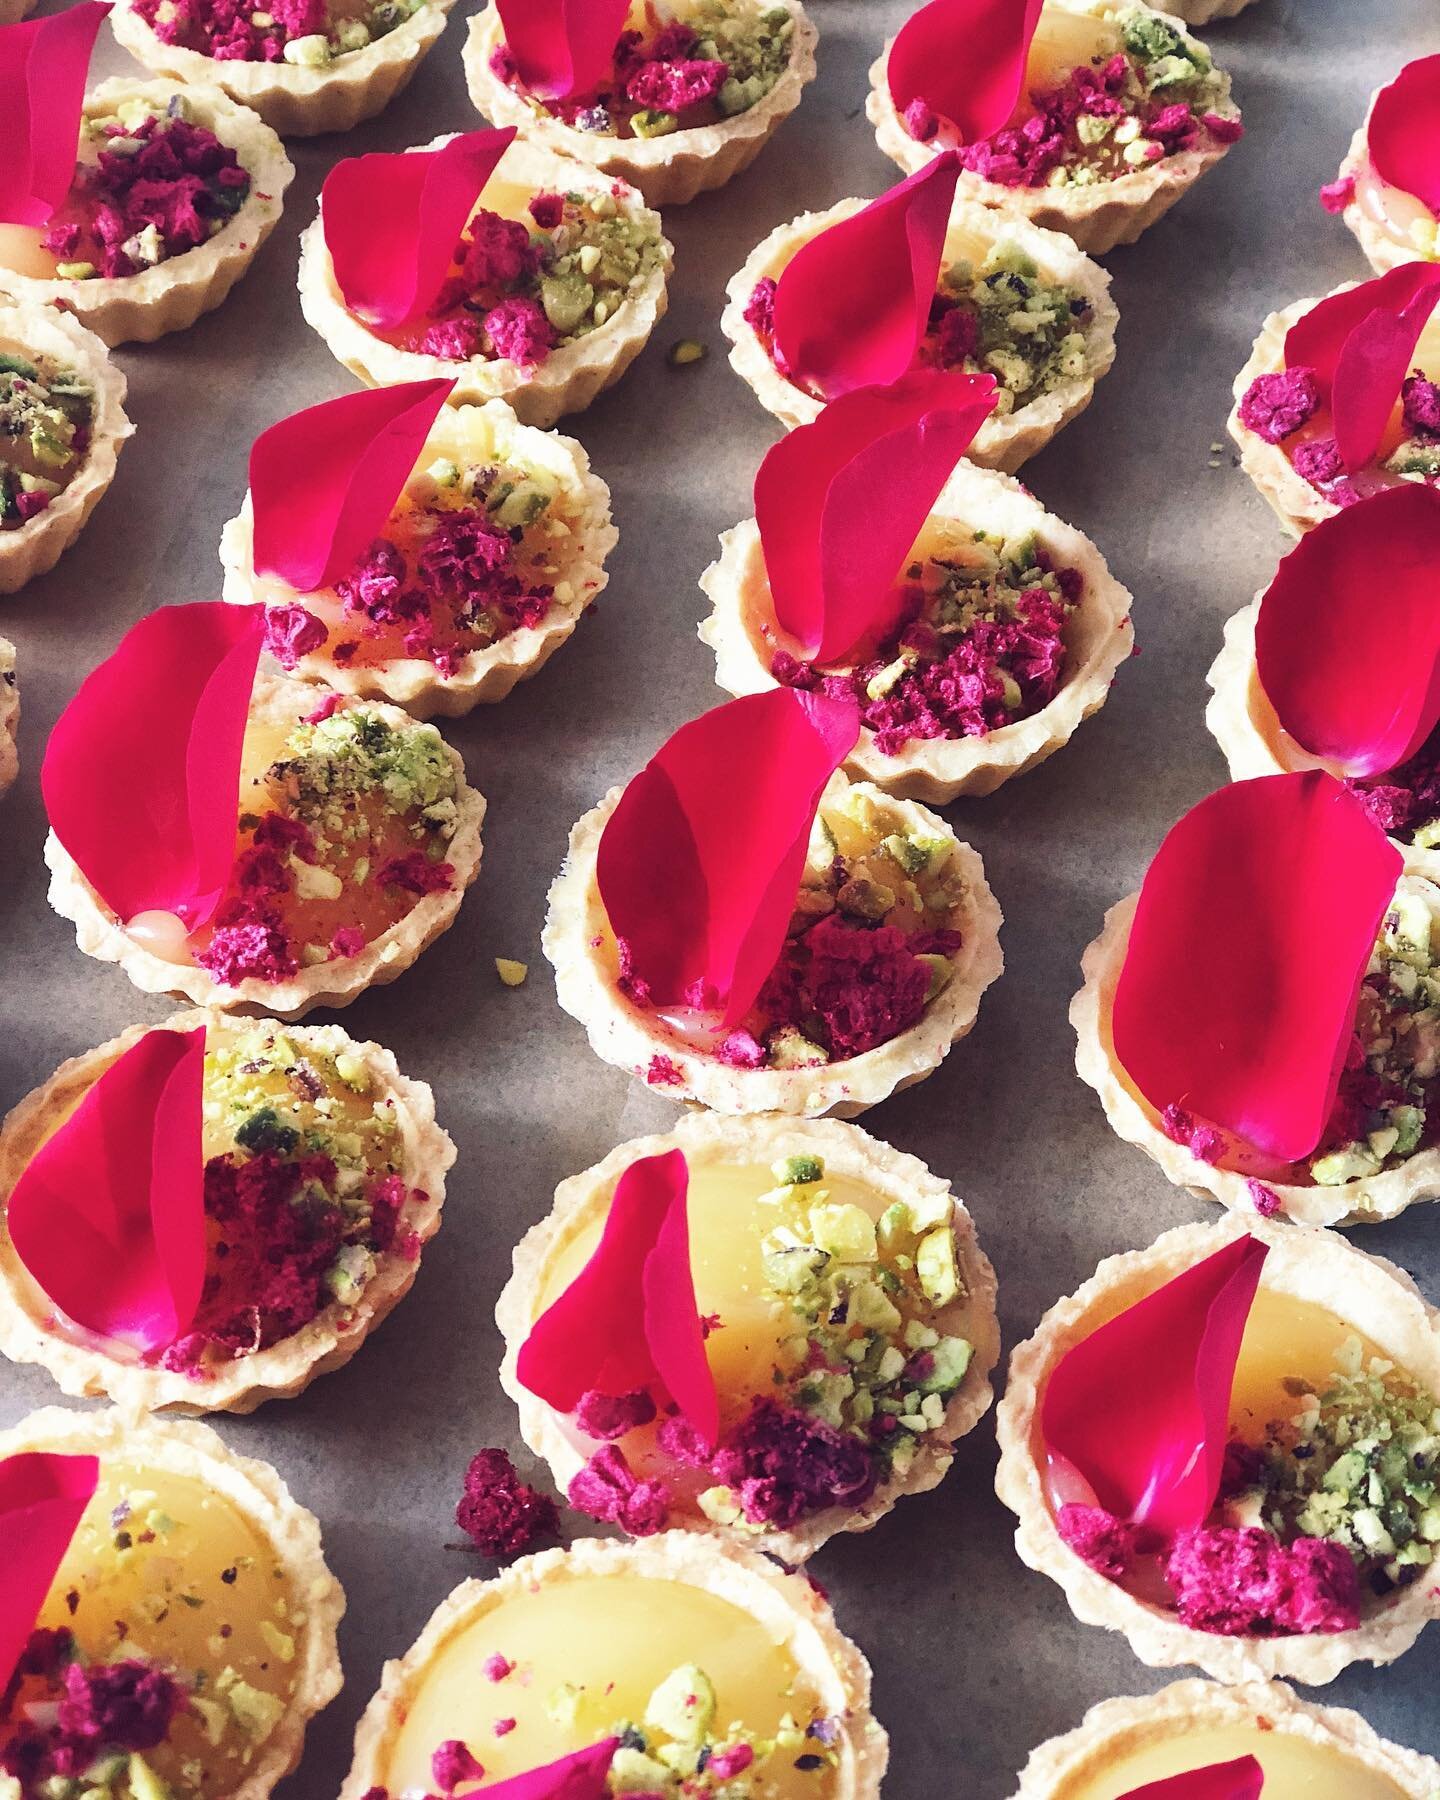 We love a canap&eacute;. Sweet, savoury or the mix of both. They are the perfect small canvas to let creativity flow.
.
.
Do you have a party or event coming up? Let us bring something sweet to the table. 
.
✉️ hello@roseandfood.co.uk